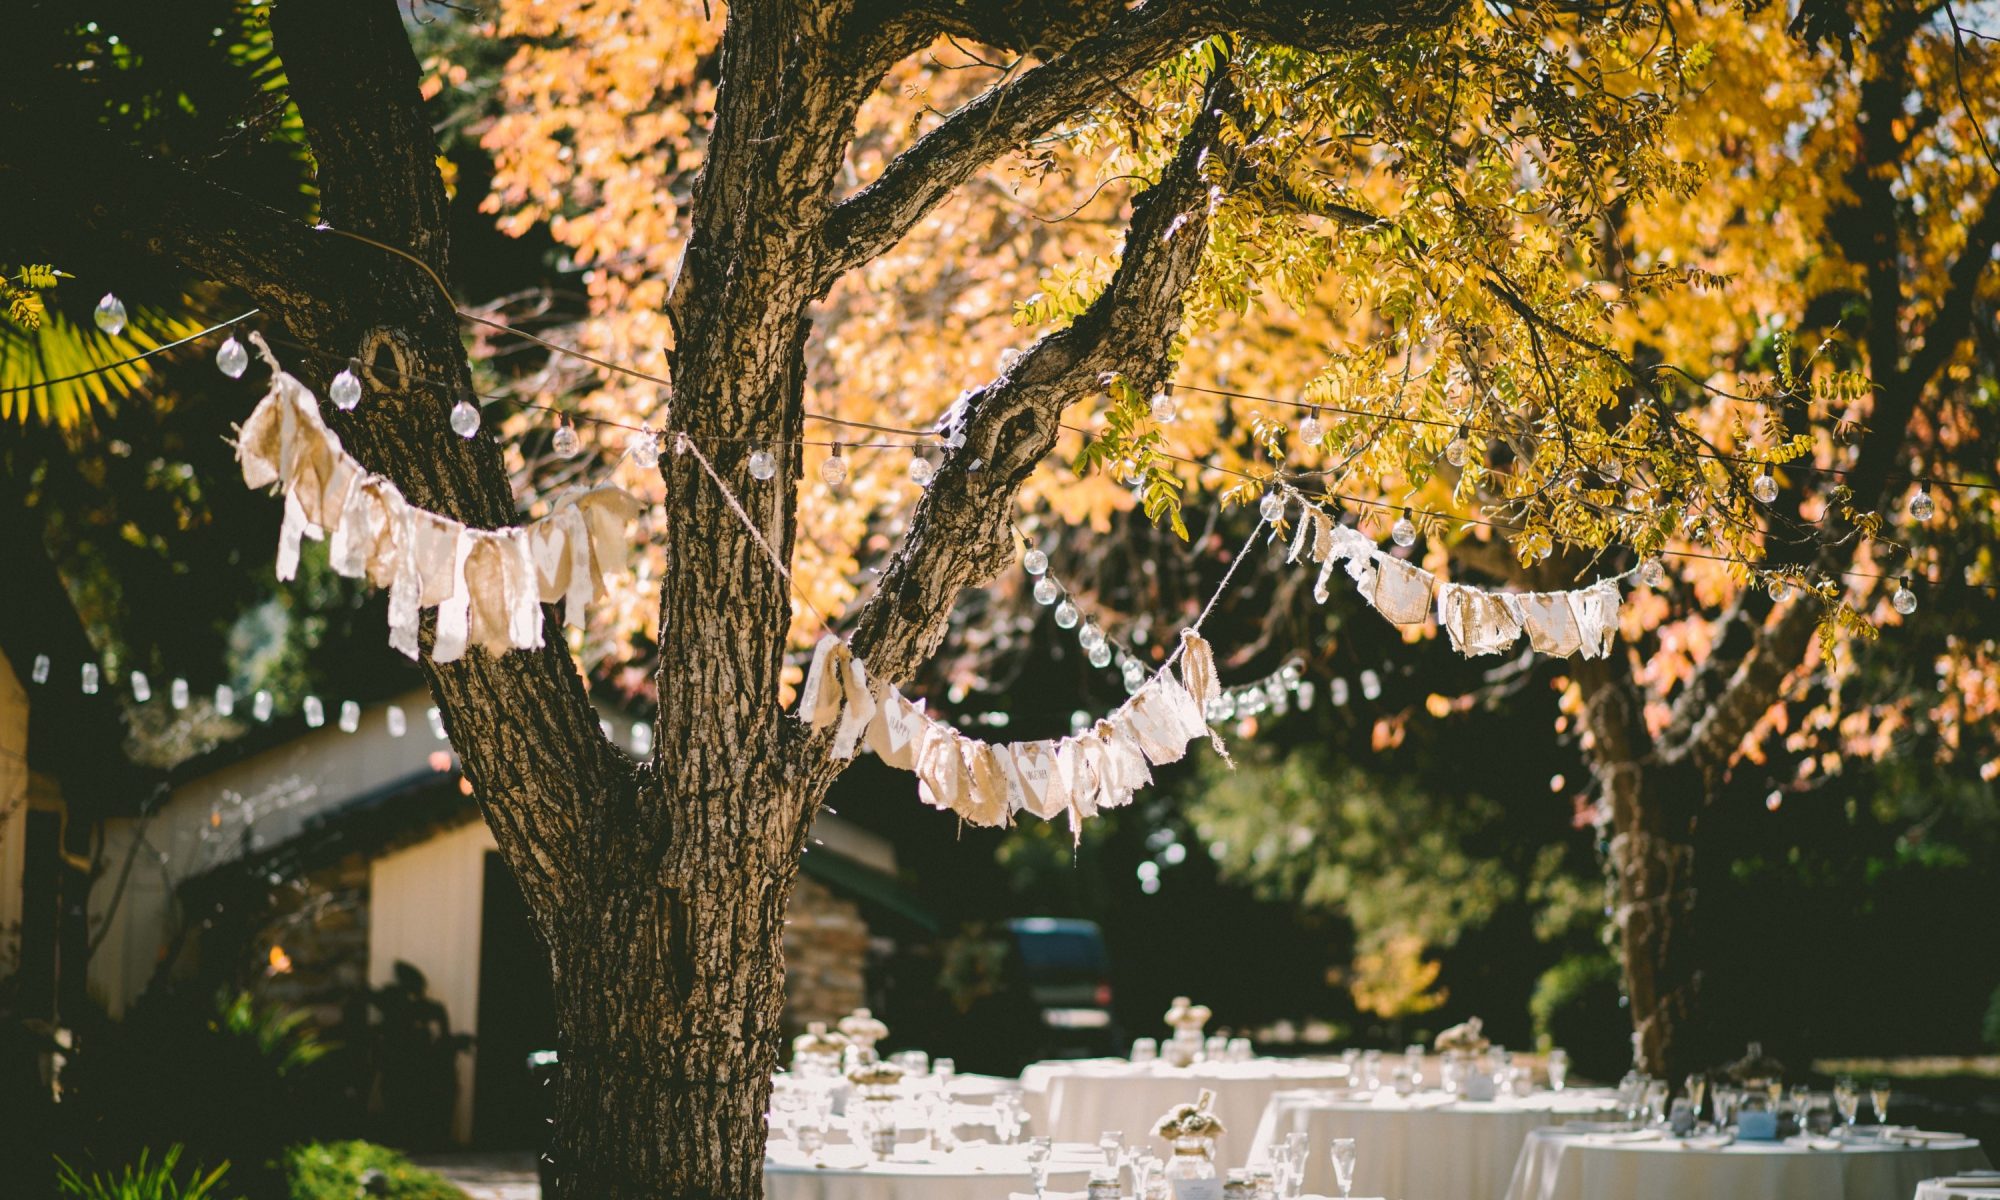 Fairy lights and bunting in outdoor wedding reception